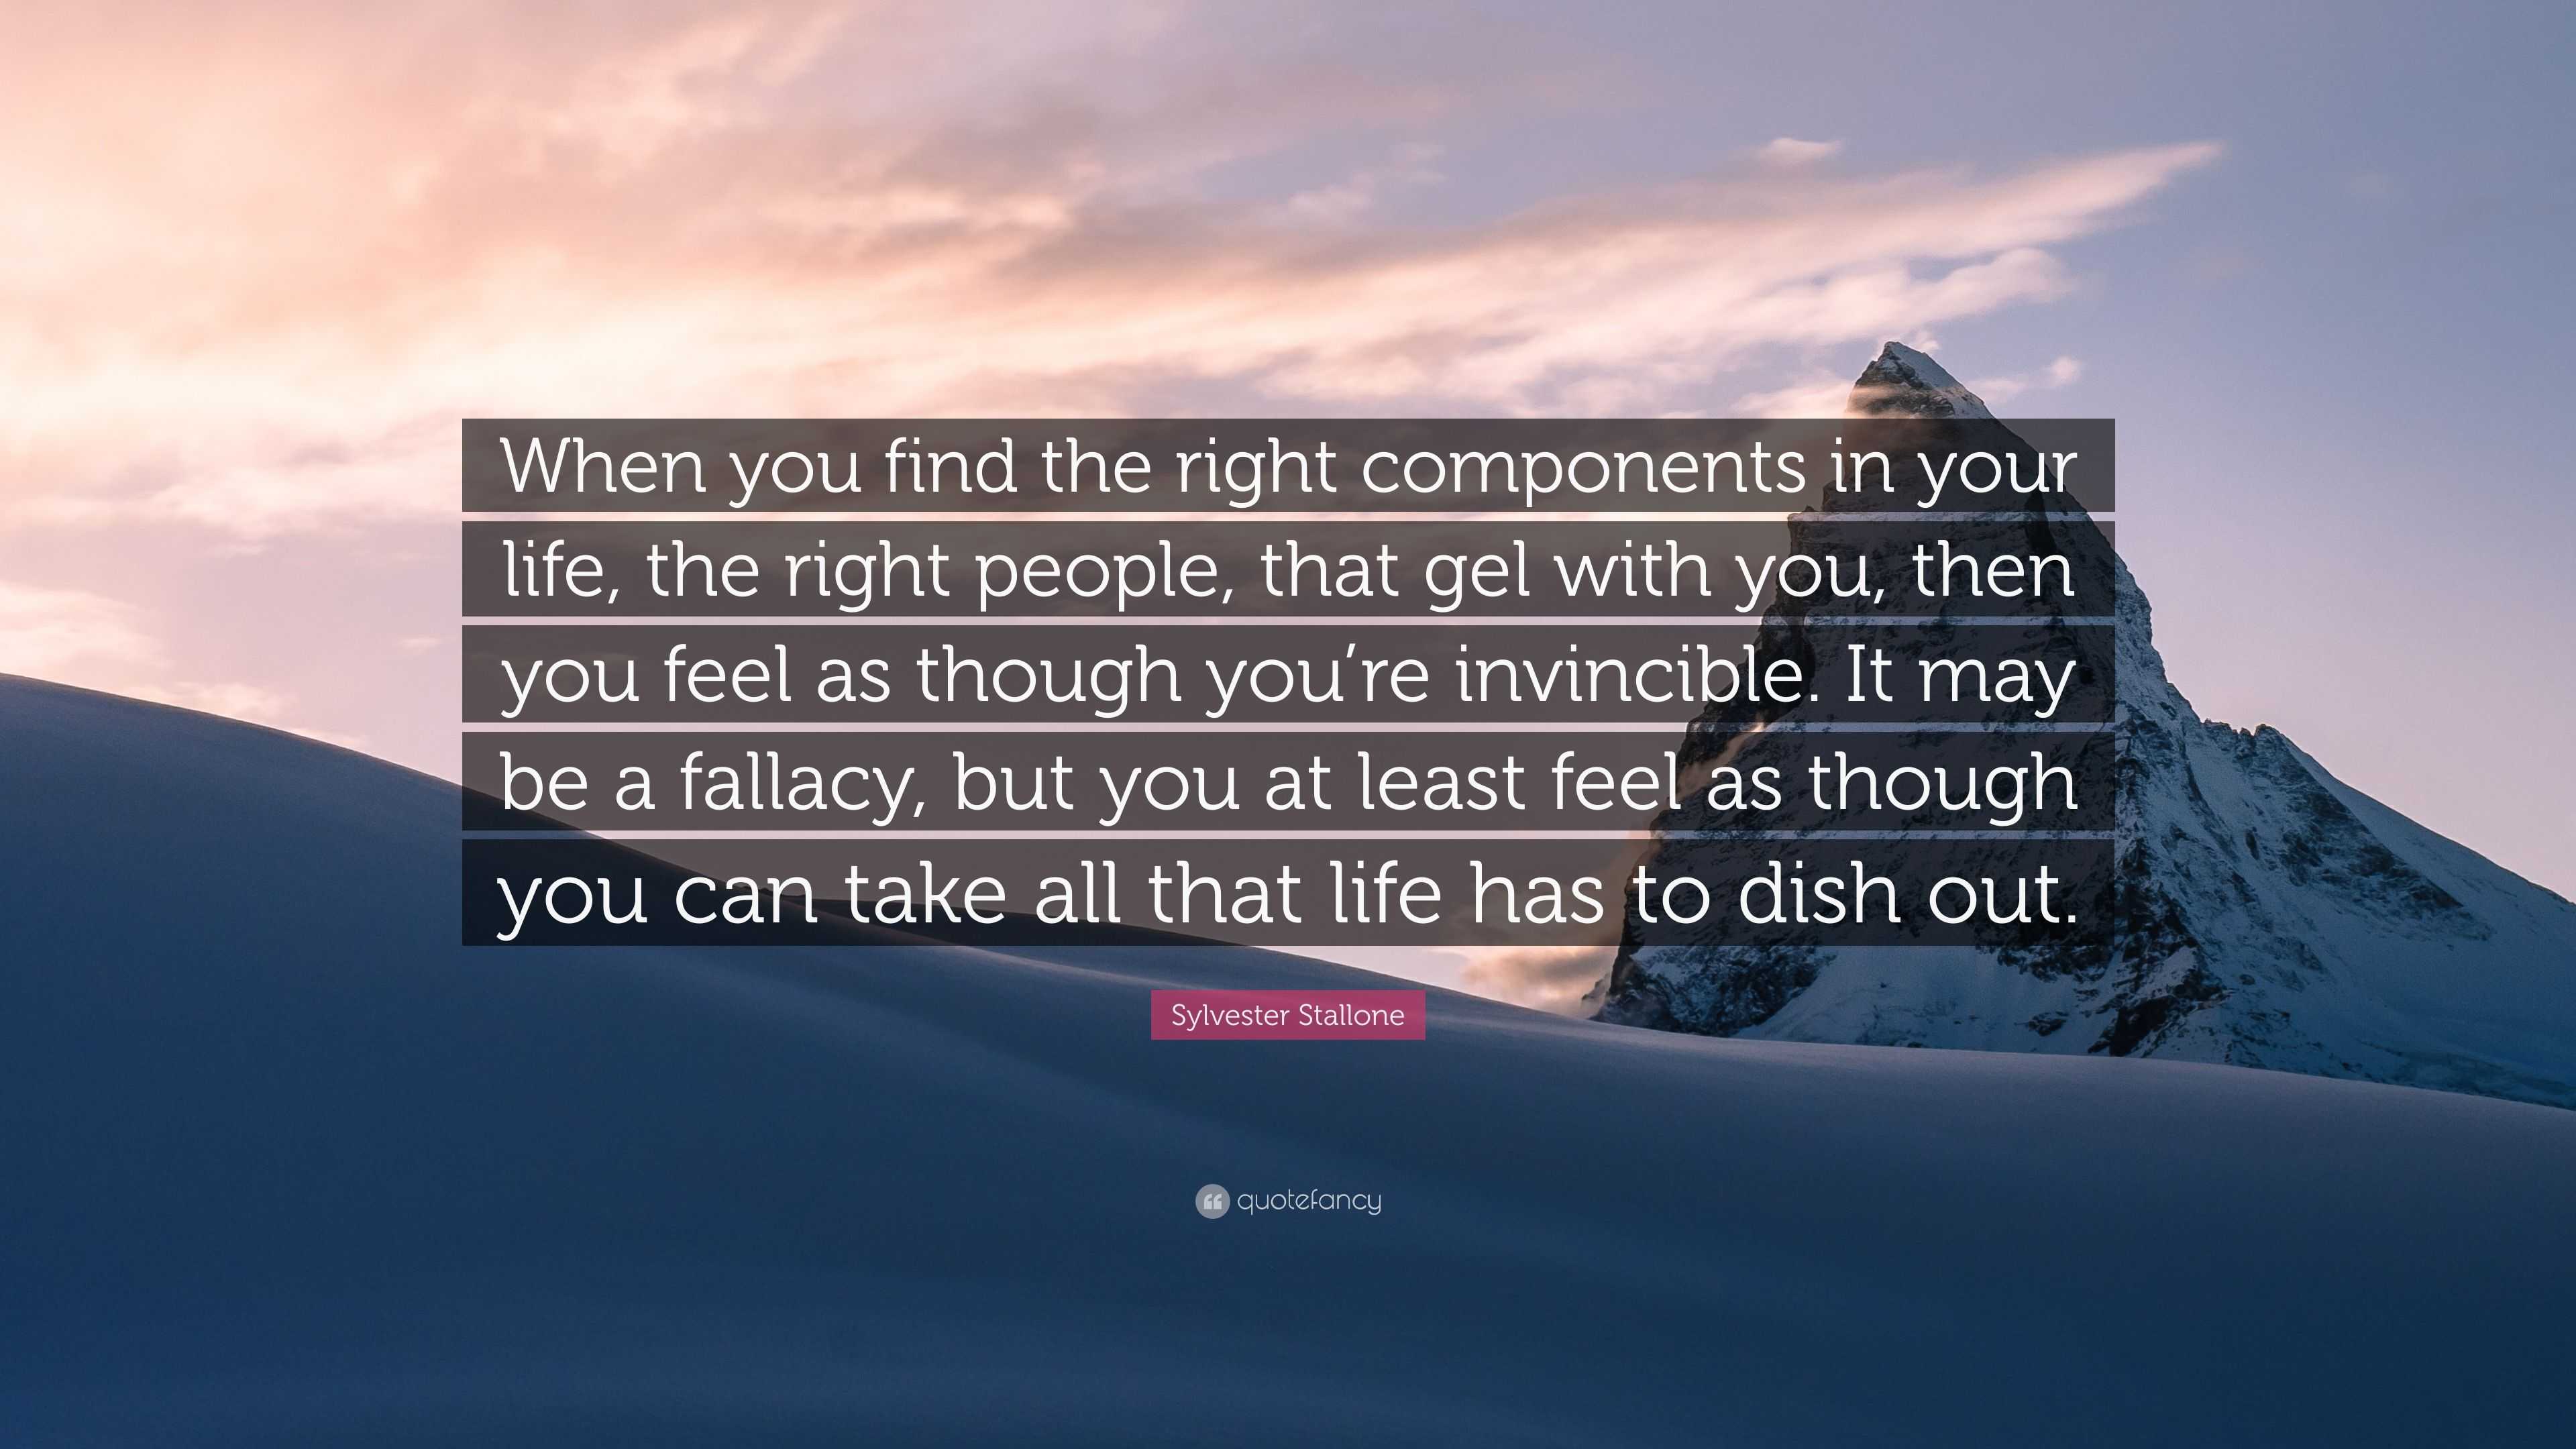 Sylvester Stallone Quote: “When you find the right components in your life,  the right people, that gel with you, then you feel as though you're inv...”